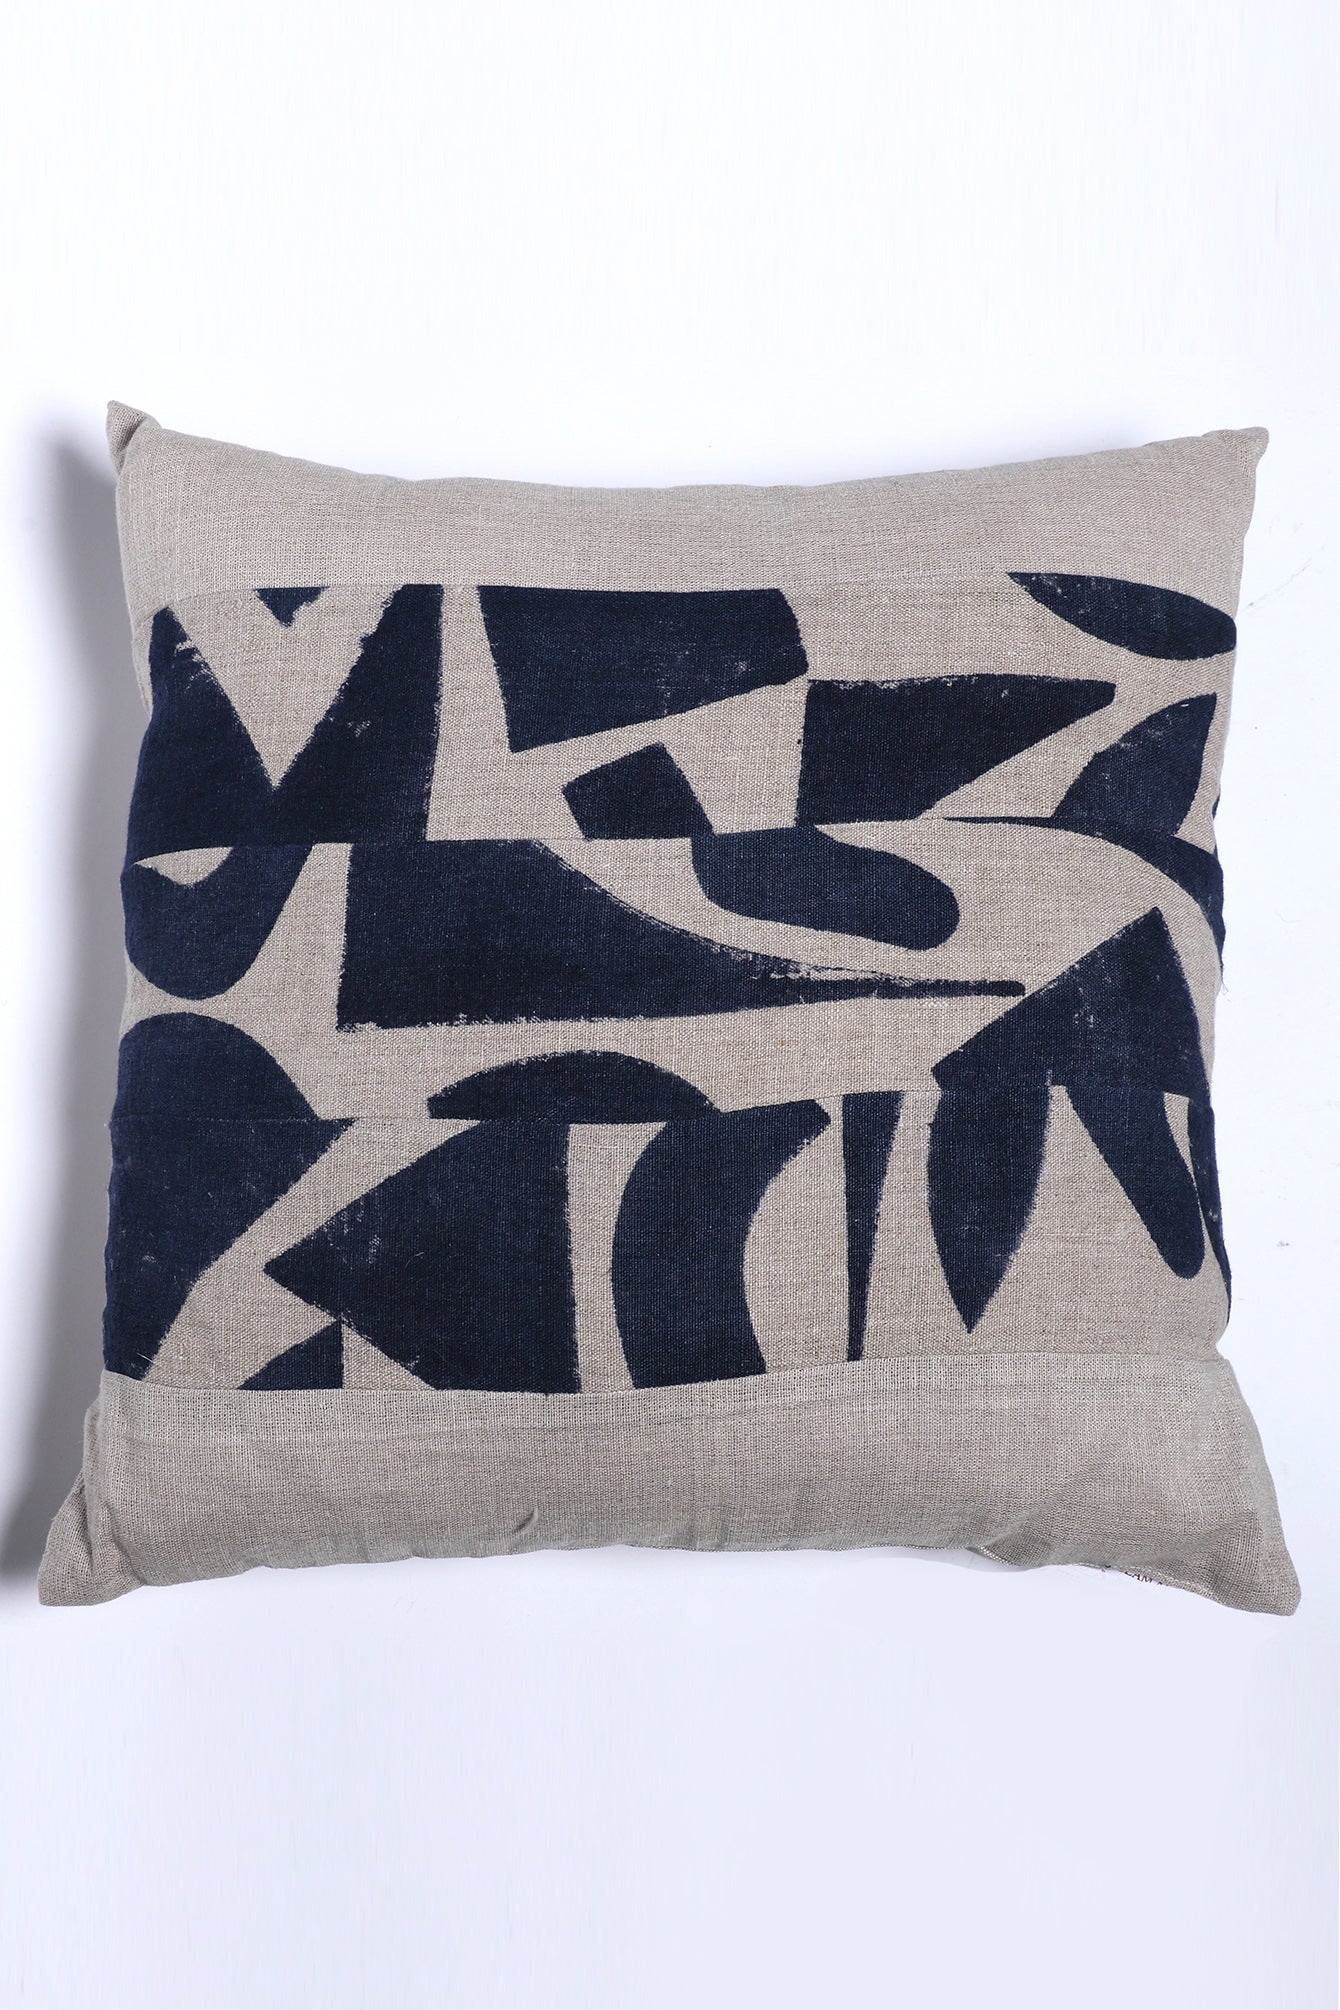 Velesin Printed Patch Cushion Cover